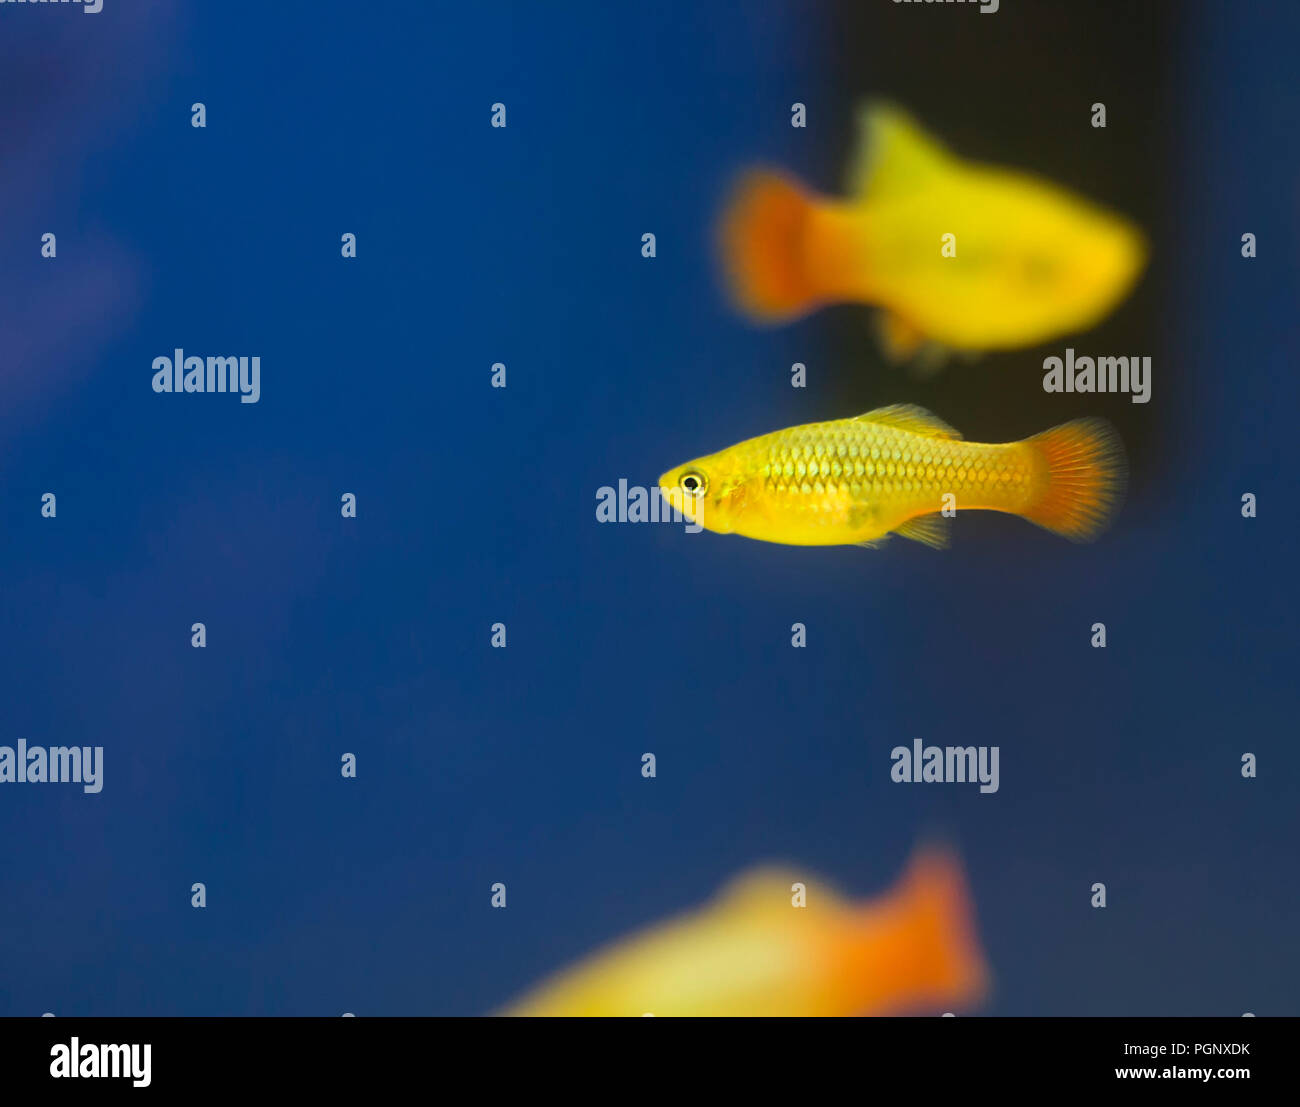 Southern platyfish, colorful aquarium fishes. The southern platyfish, common platy, or moonfish Xiphophorus maculatus is a species of freshwater fish  Stock Photo